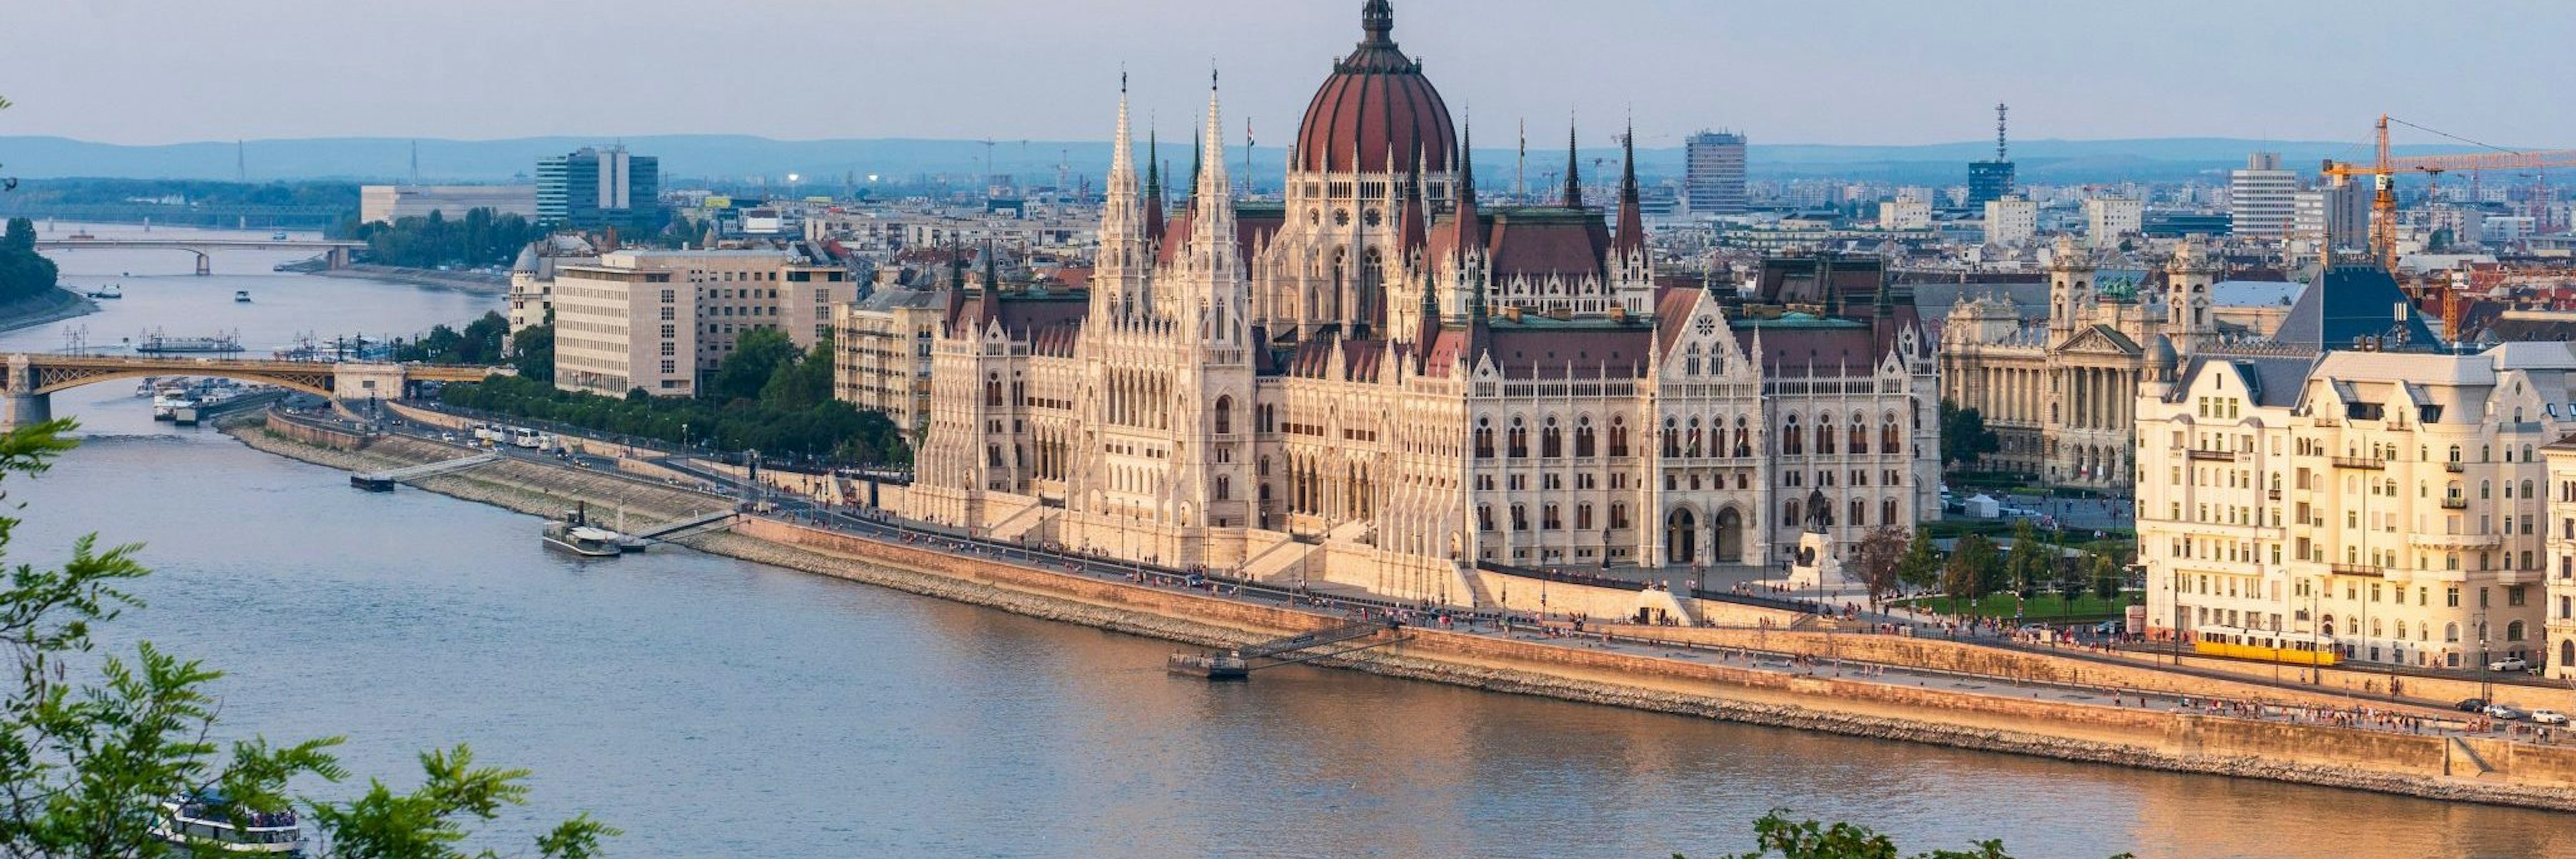 The big parliament building standing at the riverbank in Budapest